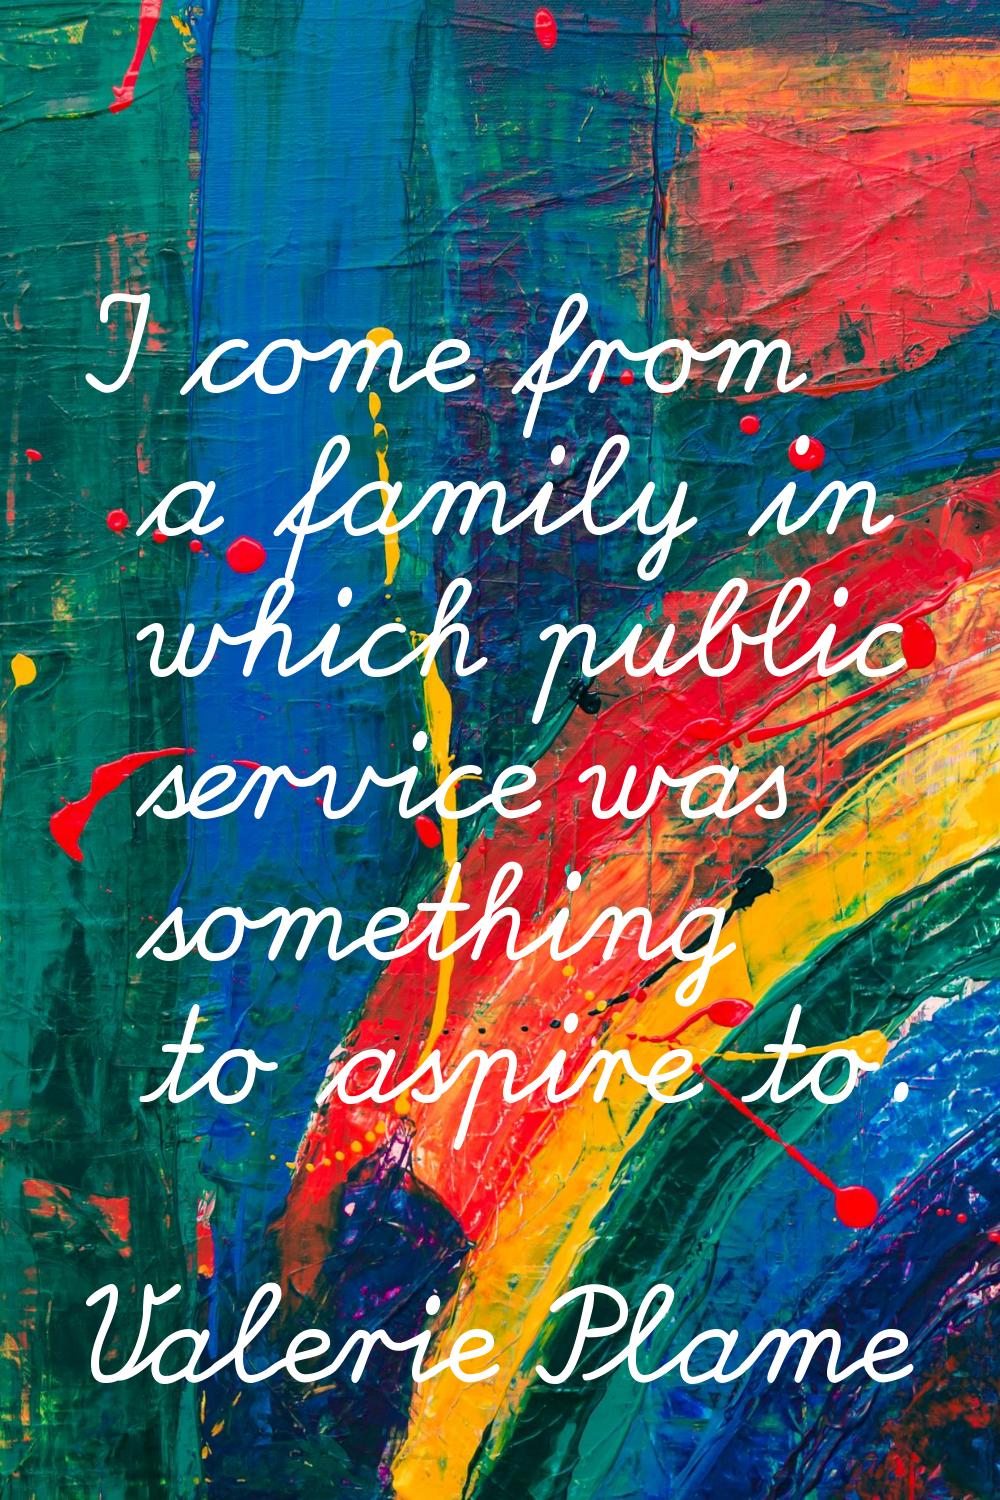 I come from a family in which public service was something to aspire to.